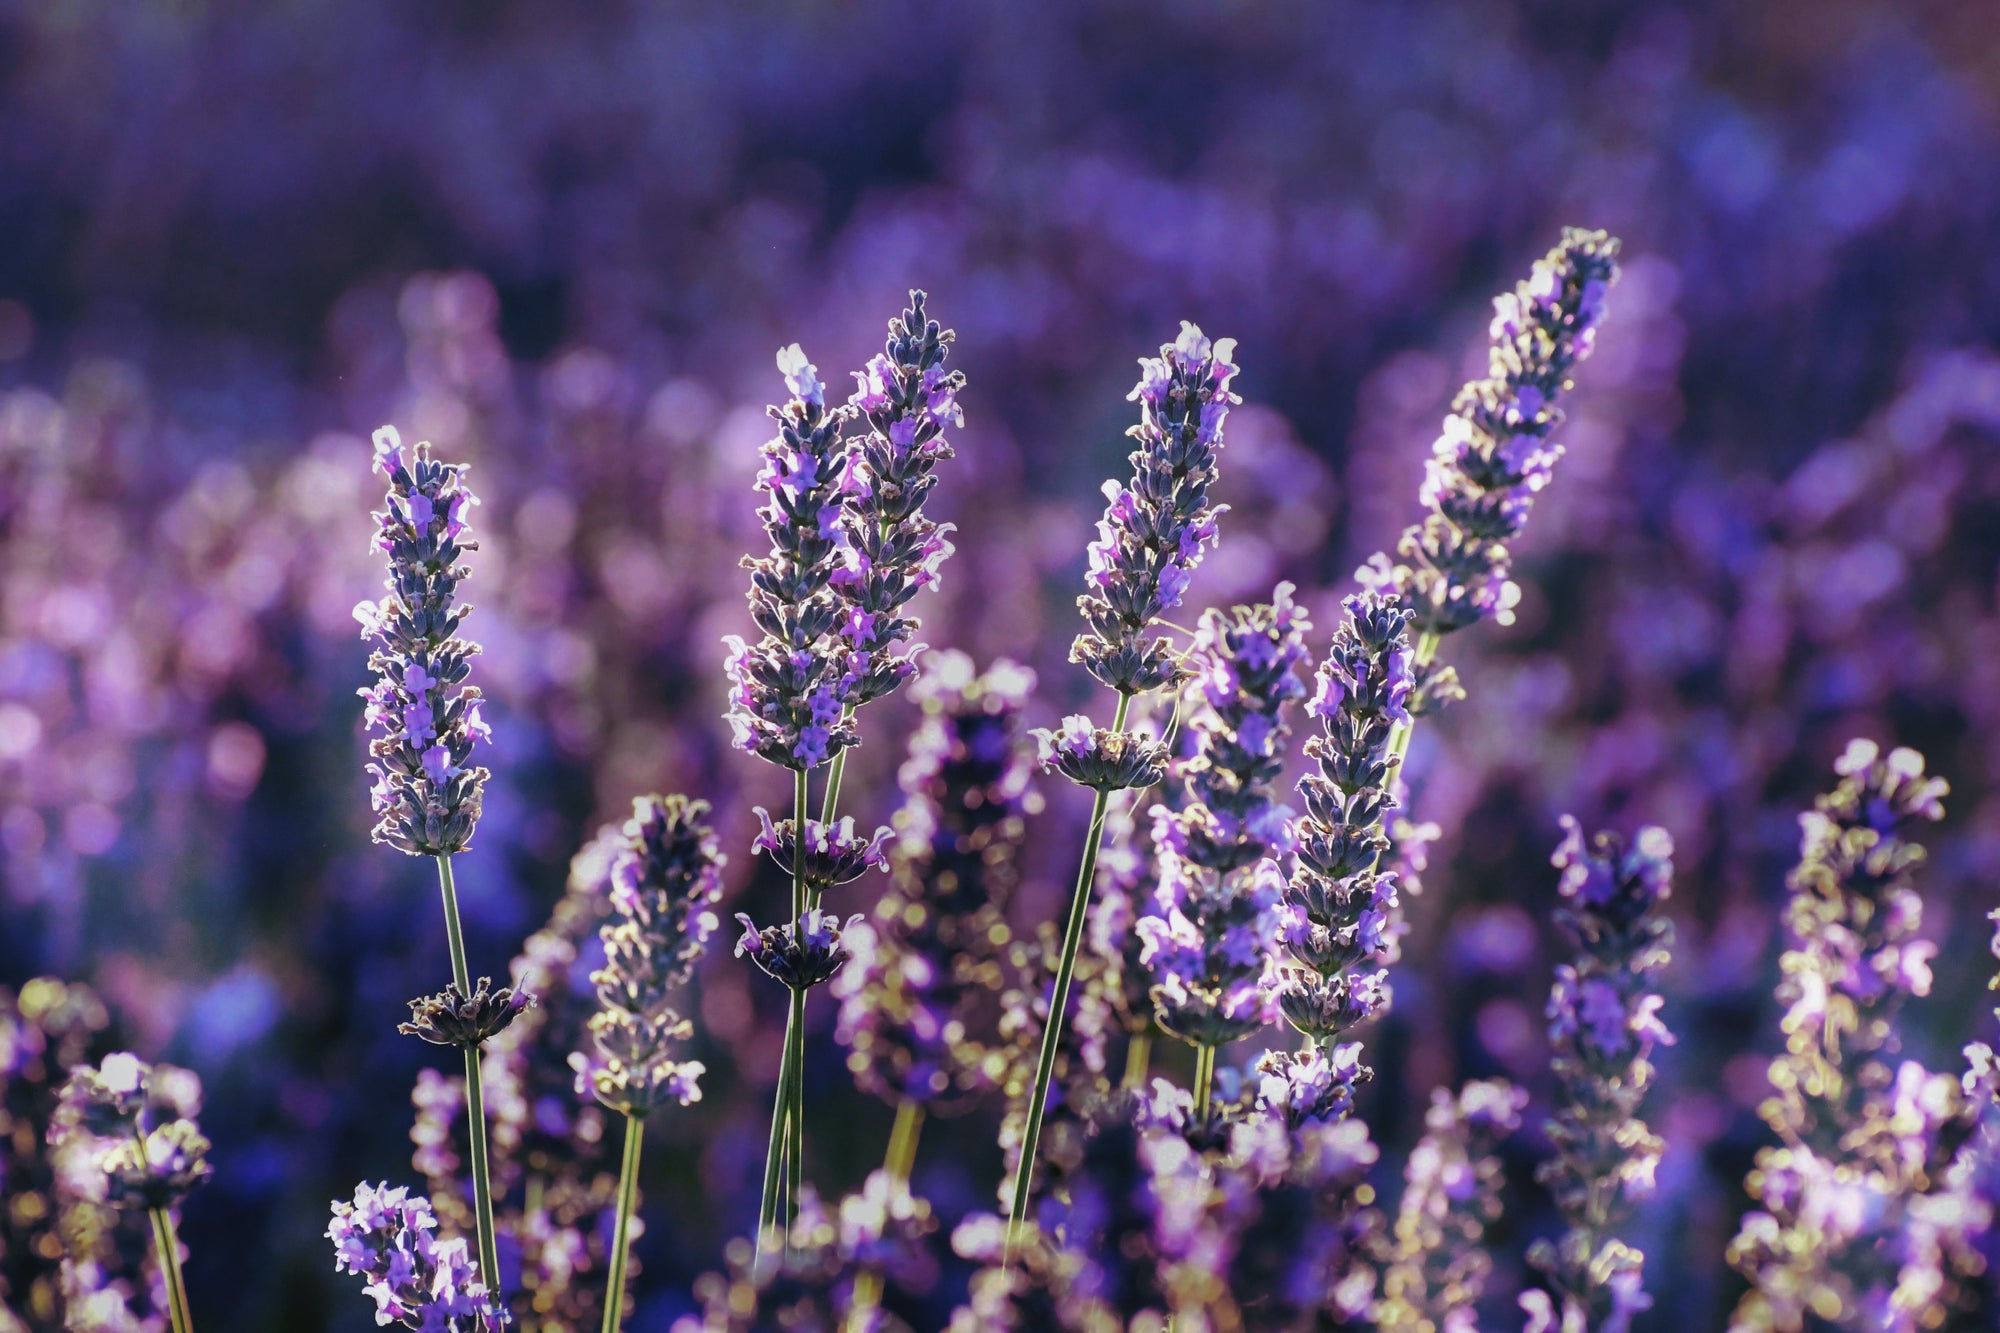 Relaxing Aromatherapy Scents to Help You Sleep